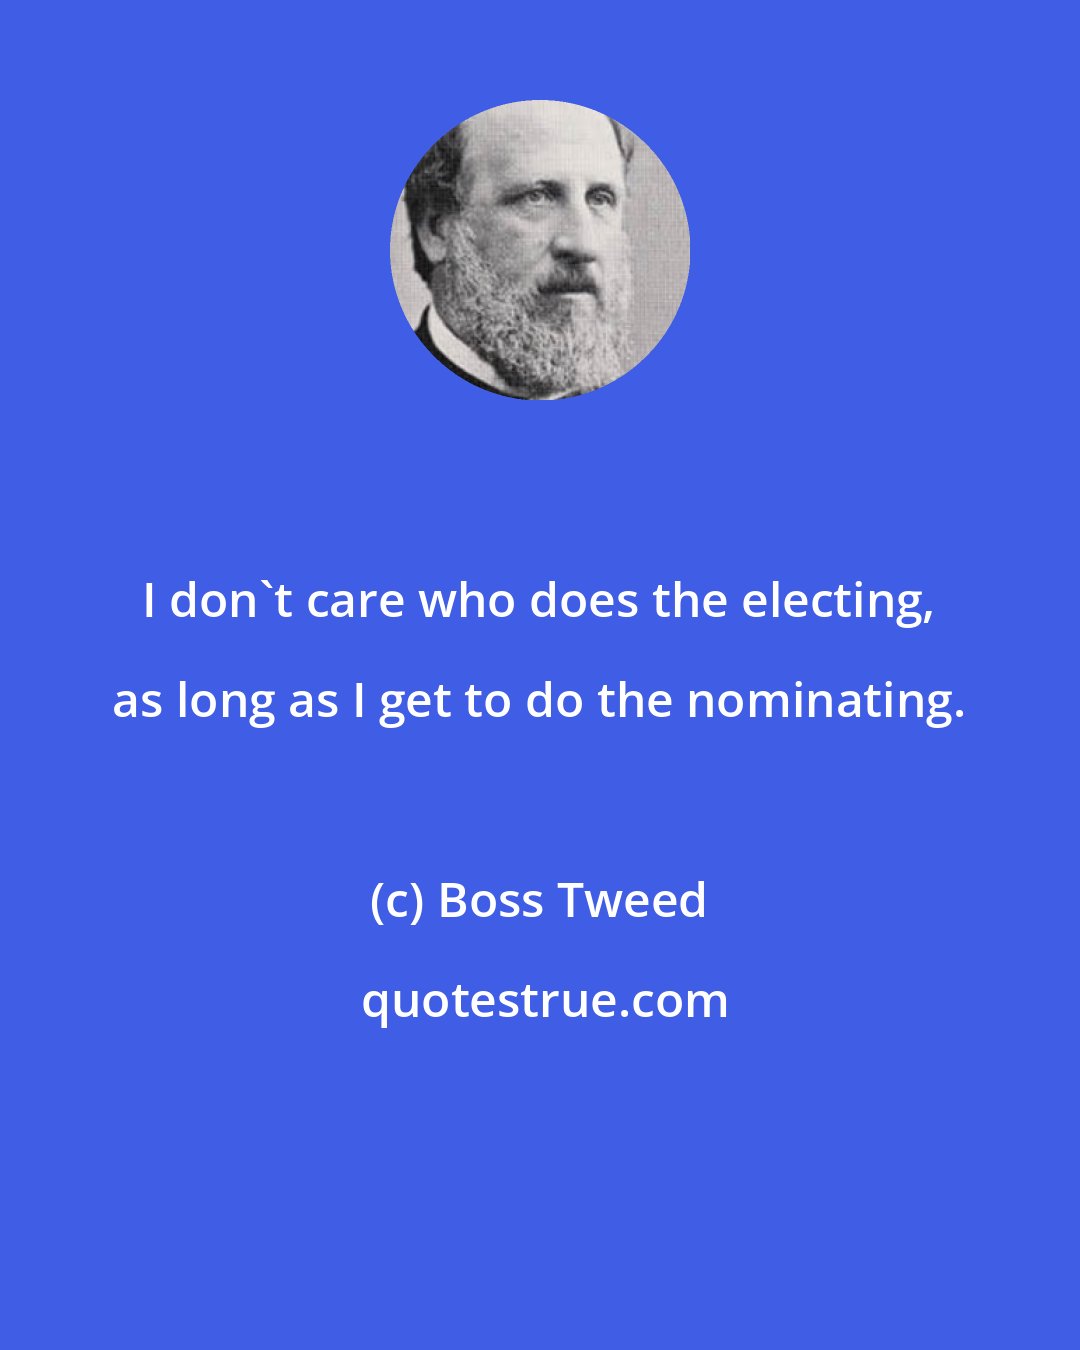 Boss Tweed: I don't care who does the electing, as long as I get to do the nominating.